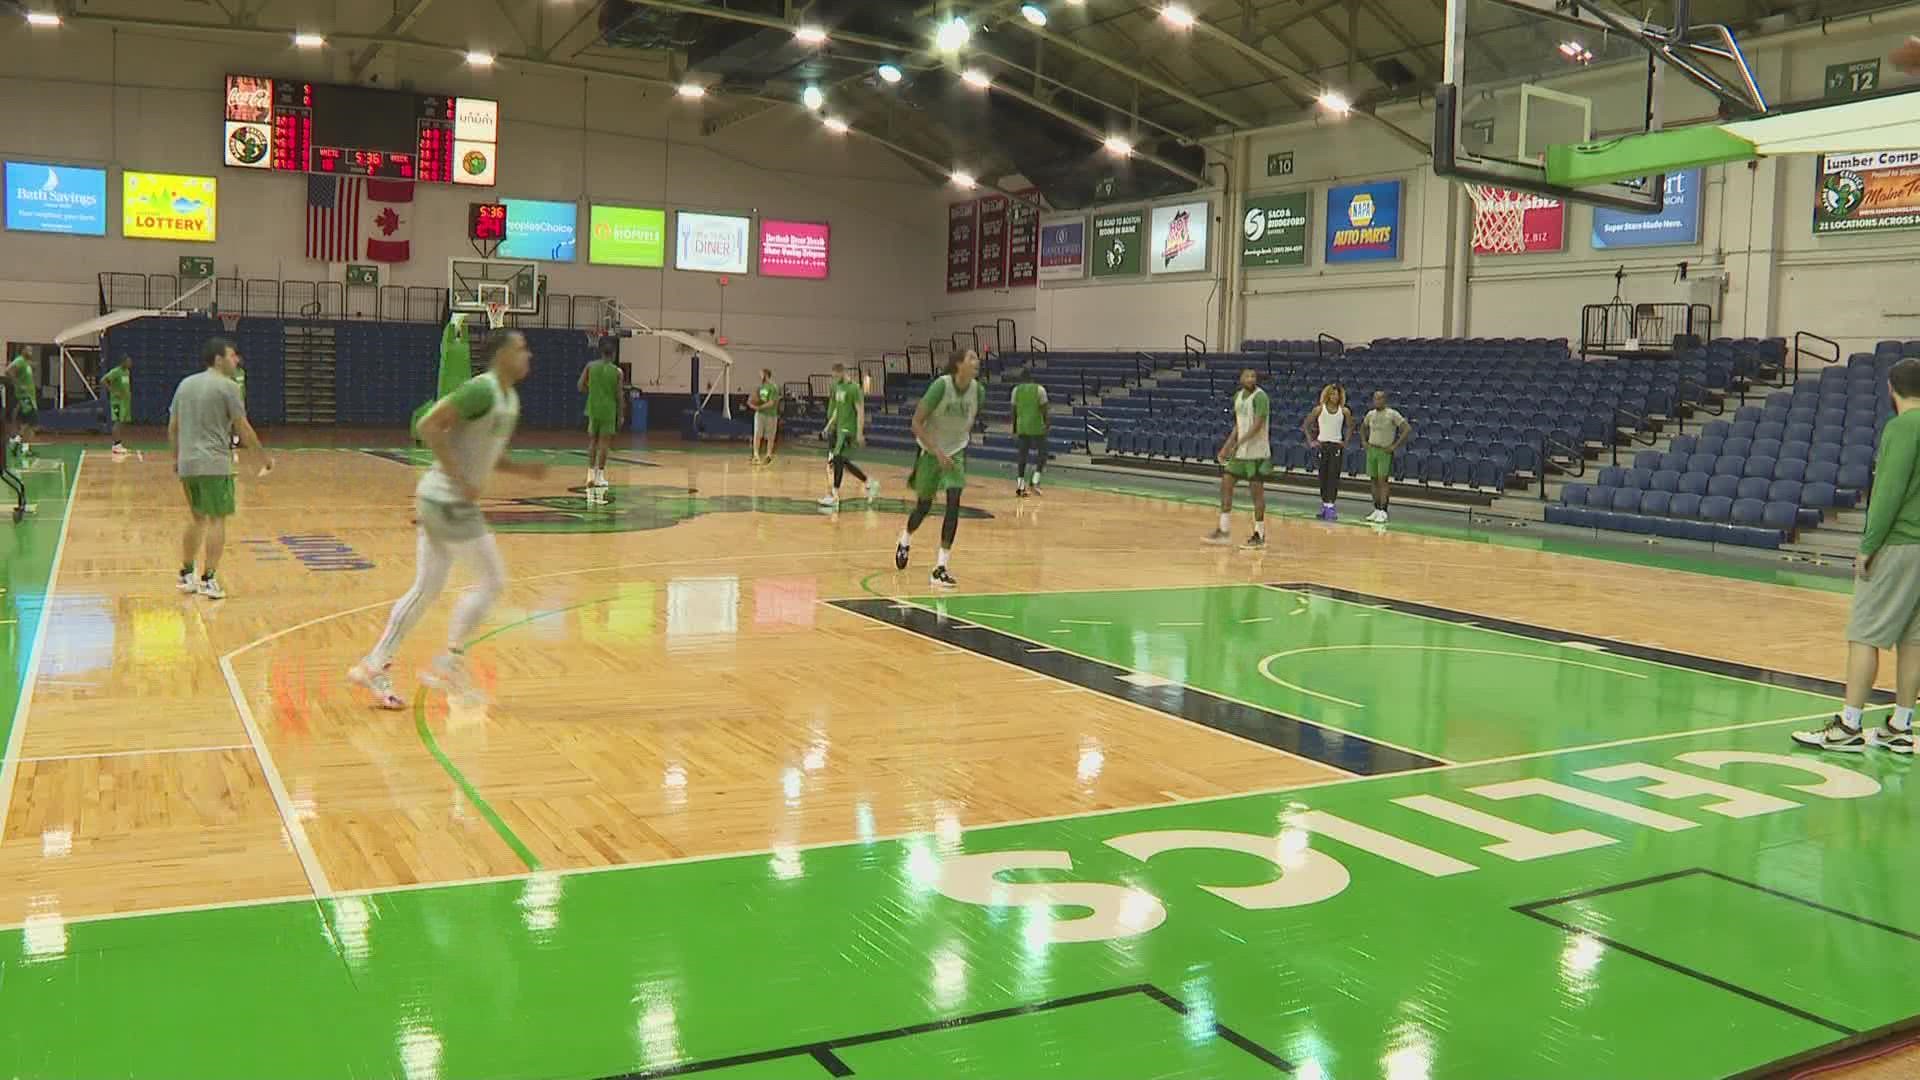 Training camp for Boston's G-League affiliate began this week in Portland. A new coach and new players are ready for the same old Maine fans.